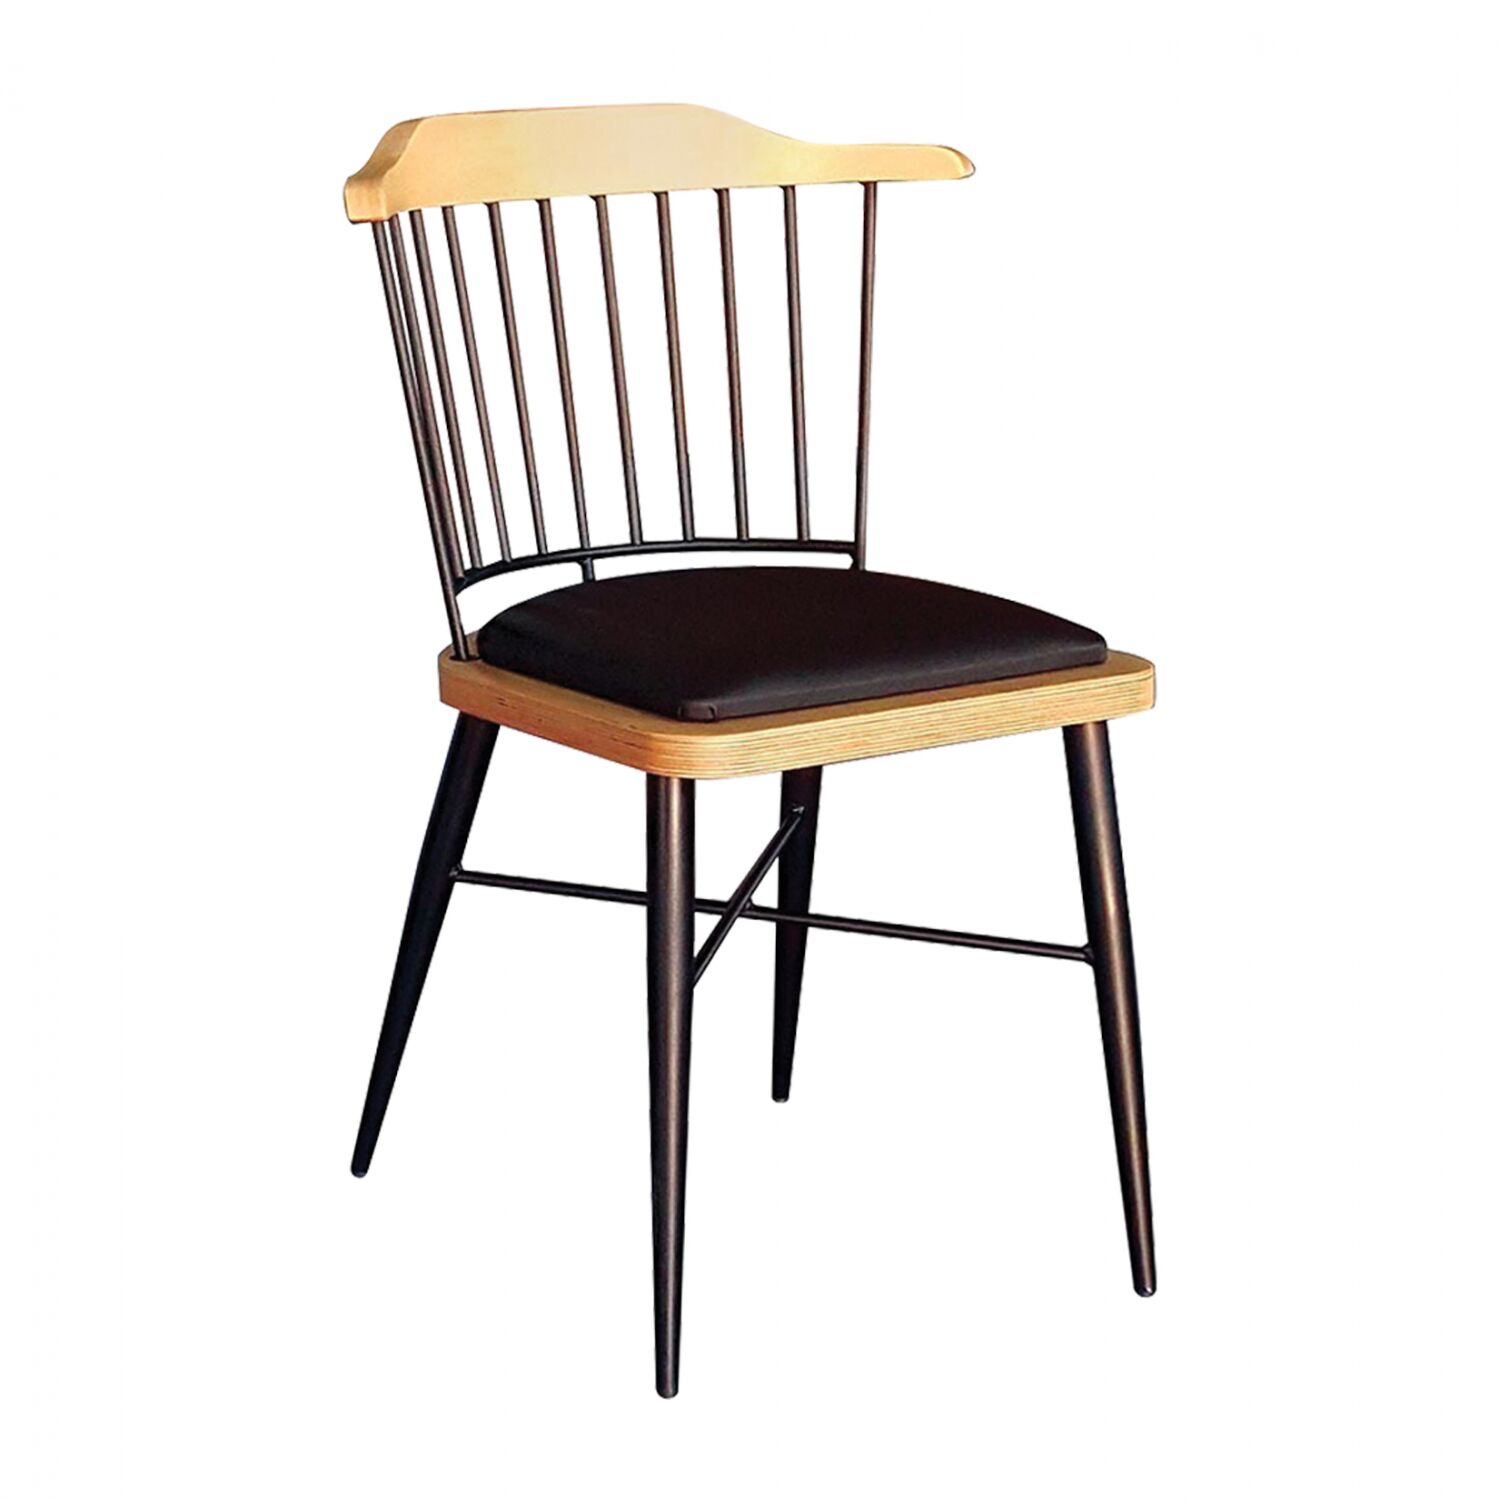 Metallic chair with seat from PU TS537